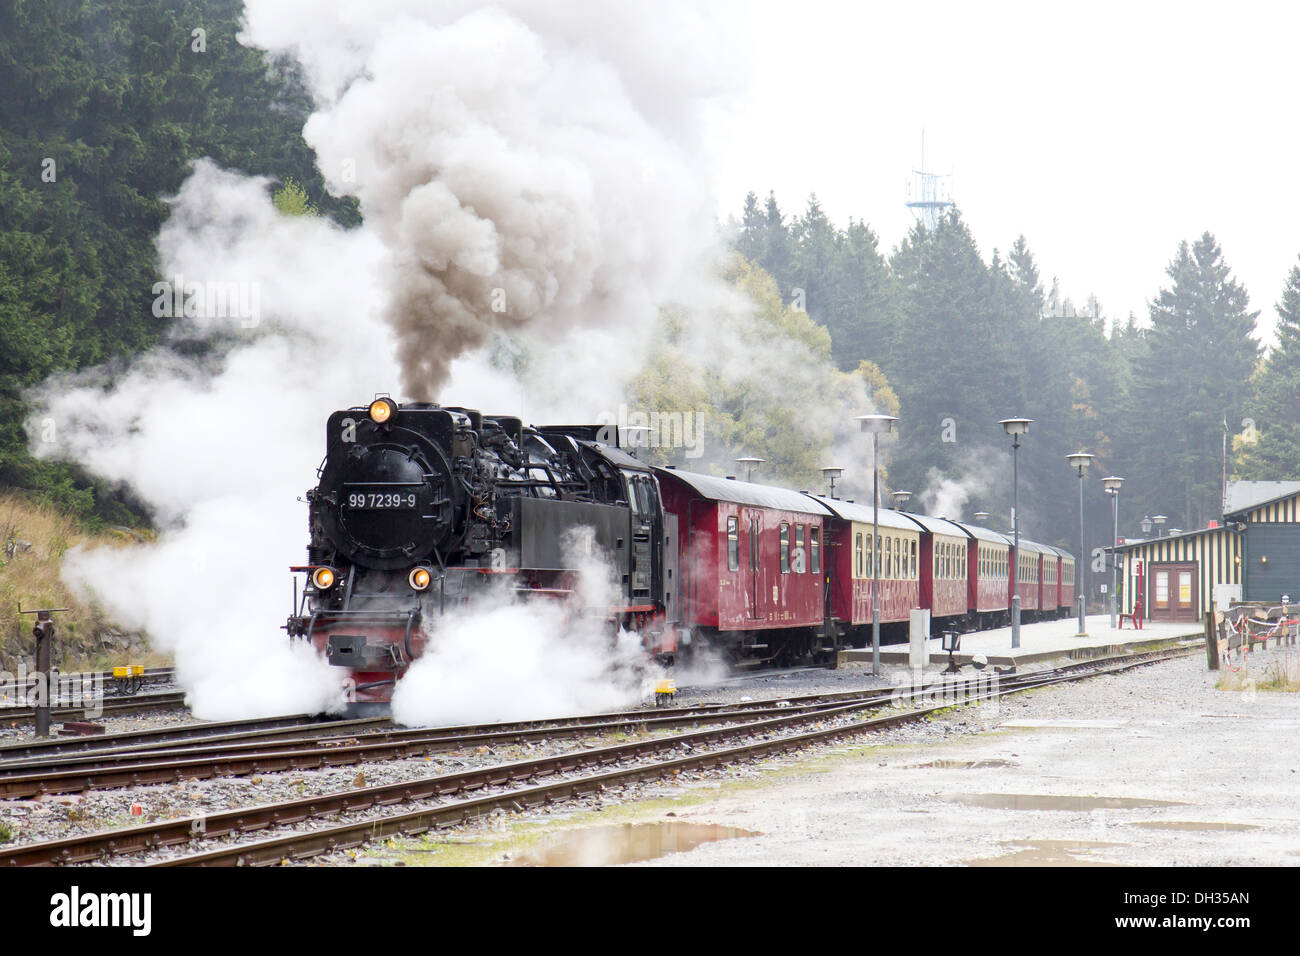 A Steam locomotive pulling a passenger train on the Harz Mountain Railway to the brocken, Germany Stock Photo